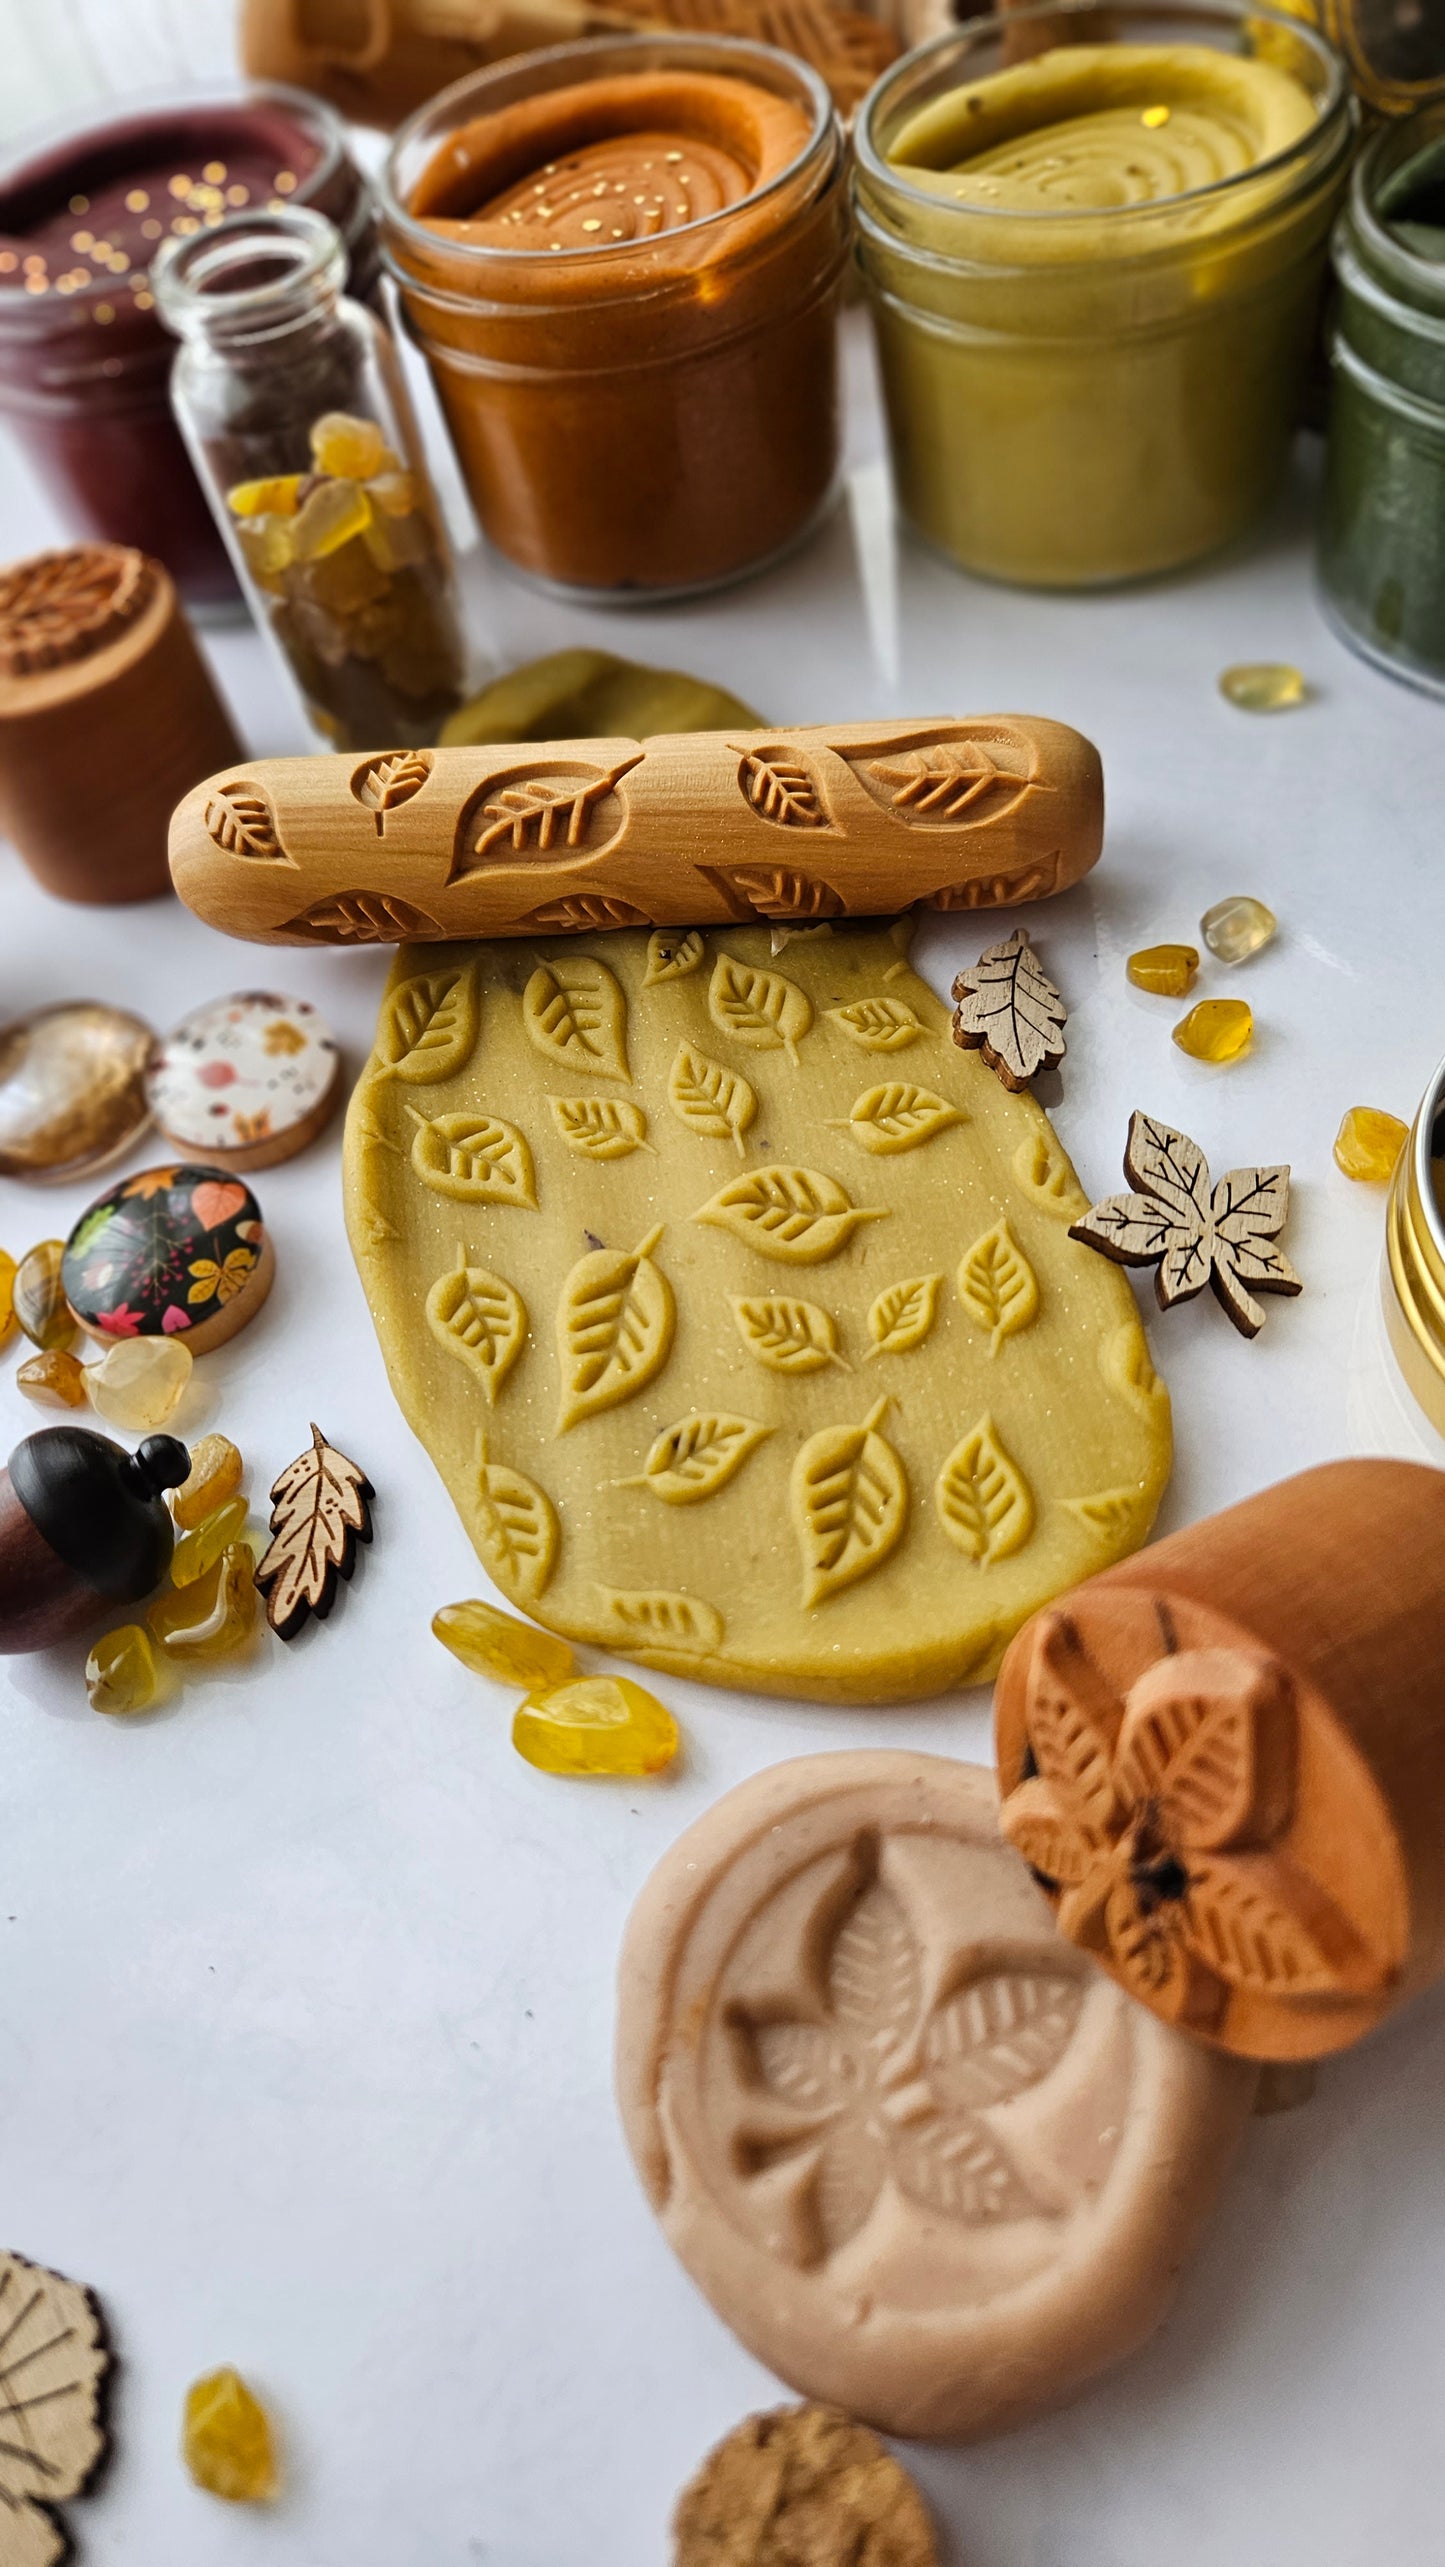 Handcrafted Golden Yellow Play Dough